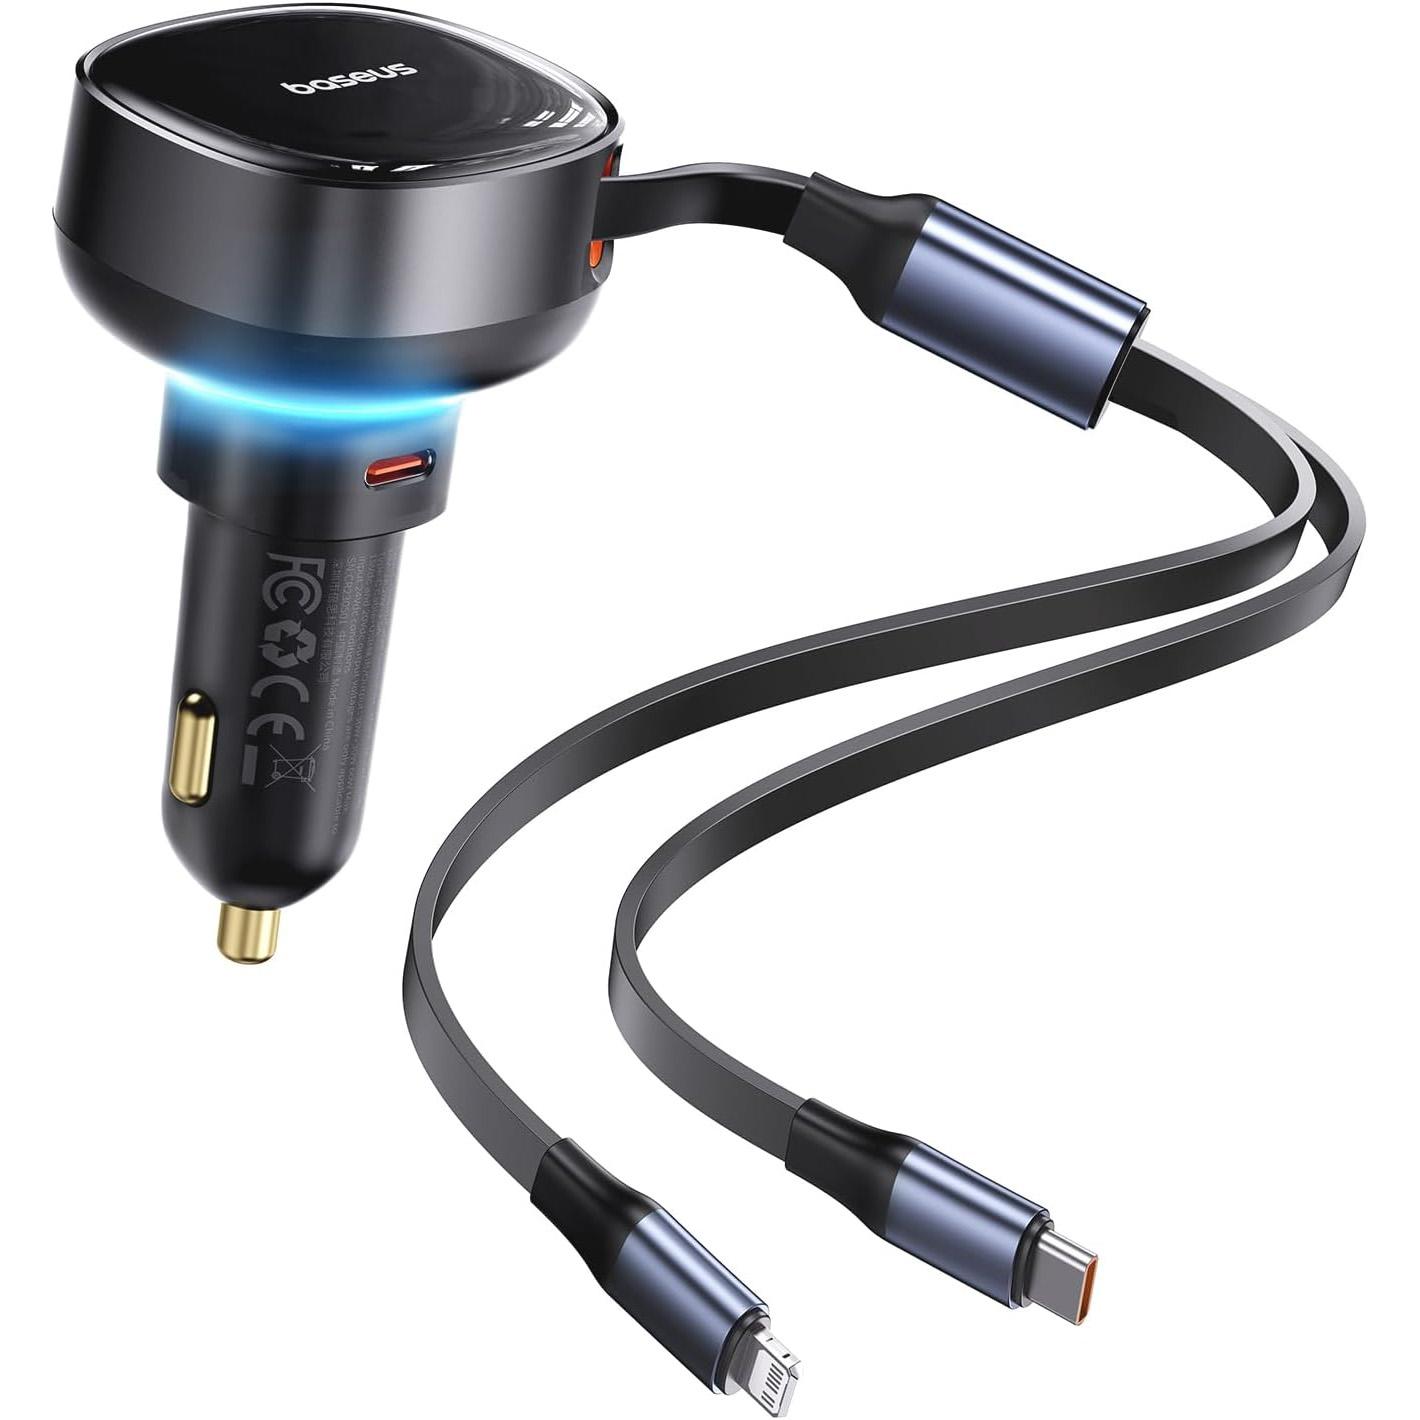 Baseus USB-C and iPhone Lightning 60W Retractable Car Charger for $11.74